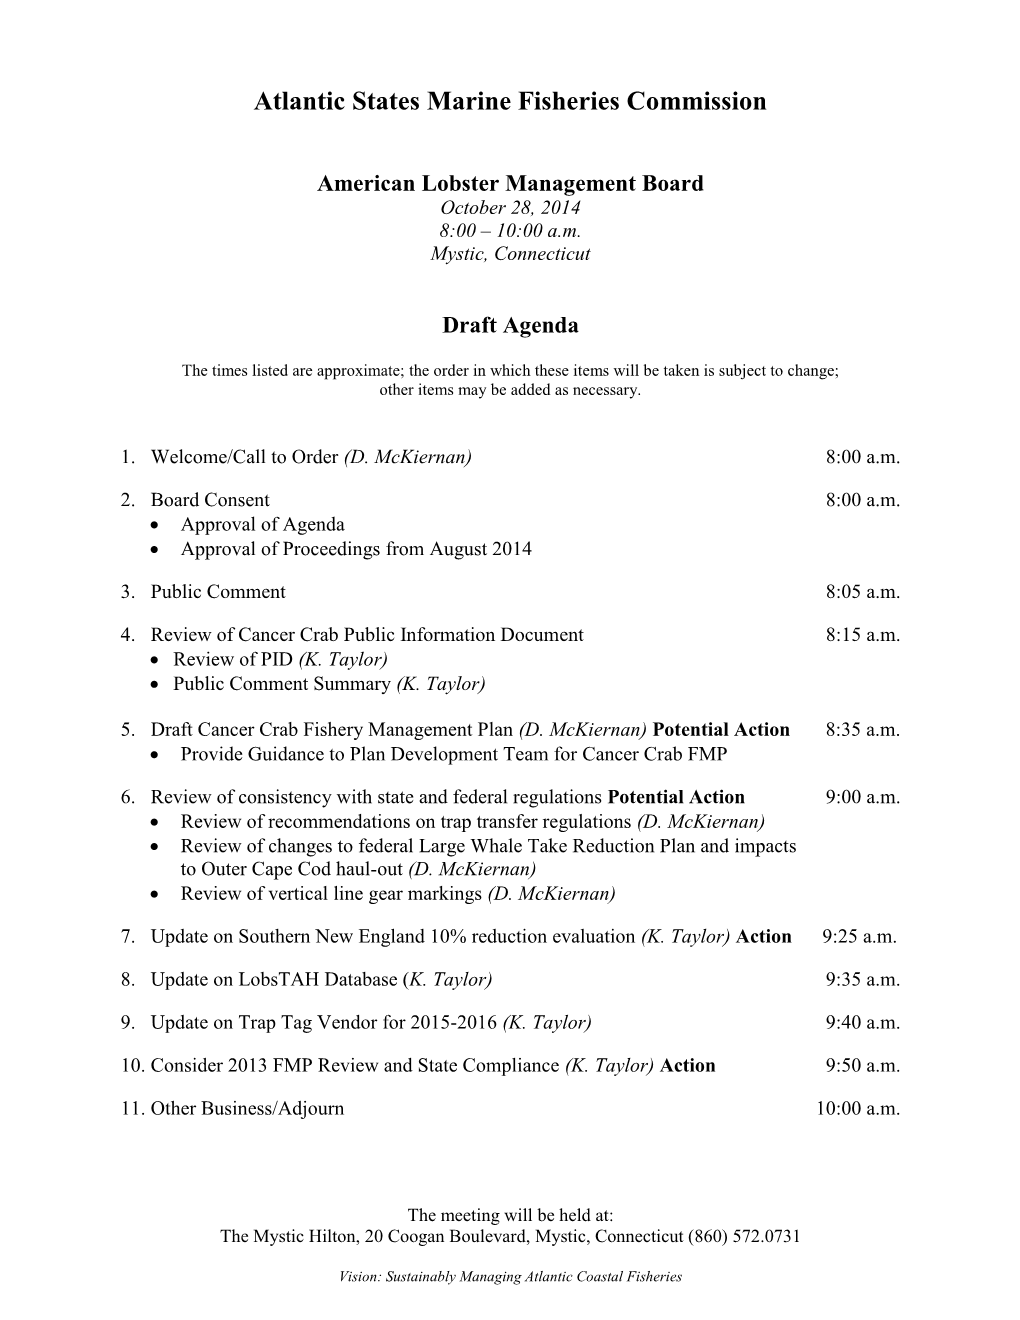 American Lobster Management Board October 28, 2014 8:00 – 10:00 A.M